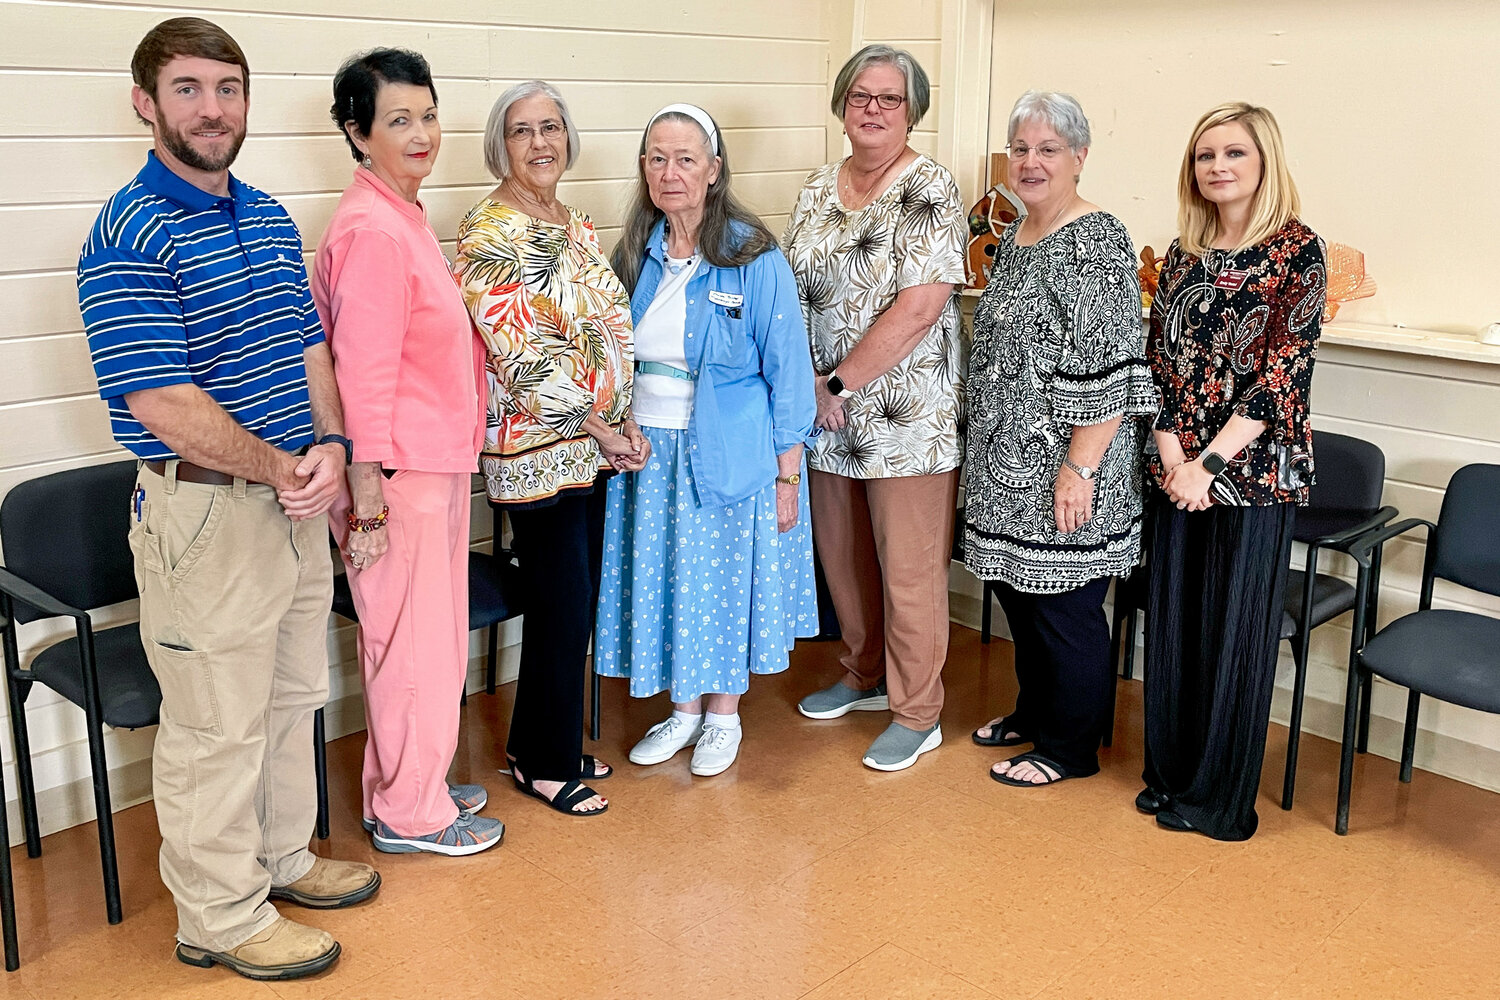 Pictured left to right: MSU Extension Agent Zach Yow, Homemakers Barbara Pardue, Linda Hester, Freida Bishop, Betty Hickey, Gail Senn, and MSU Extension Agent Emily Vestal